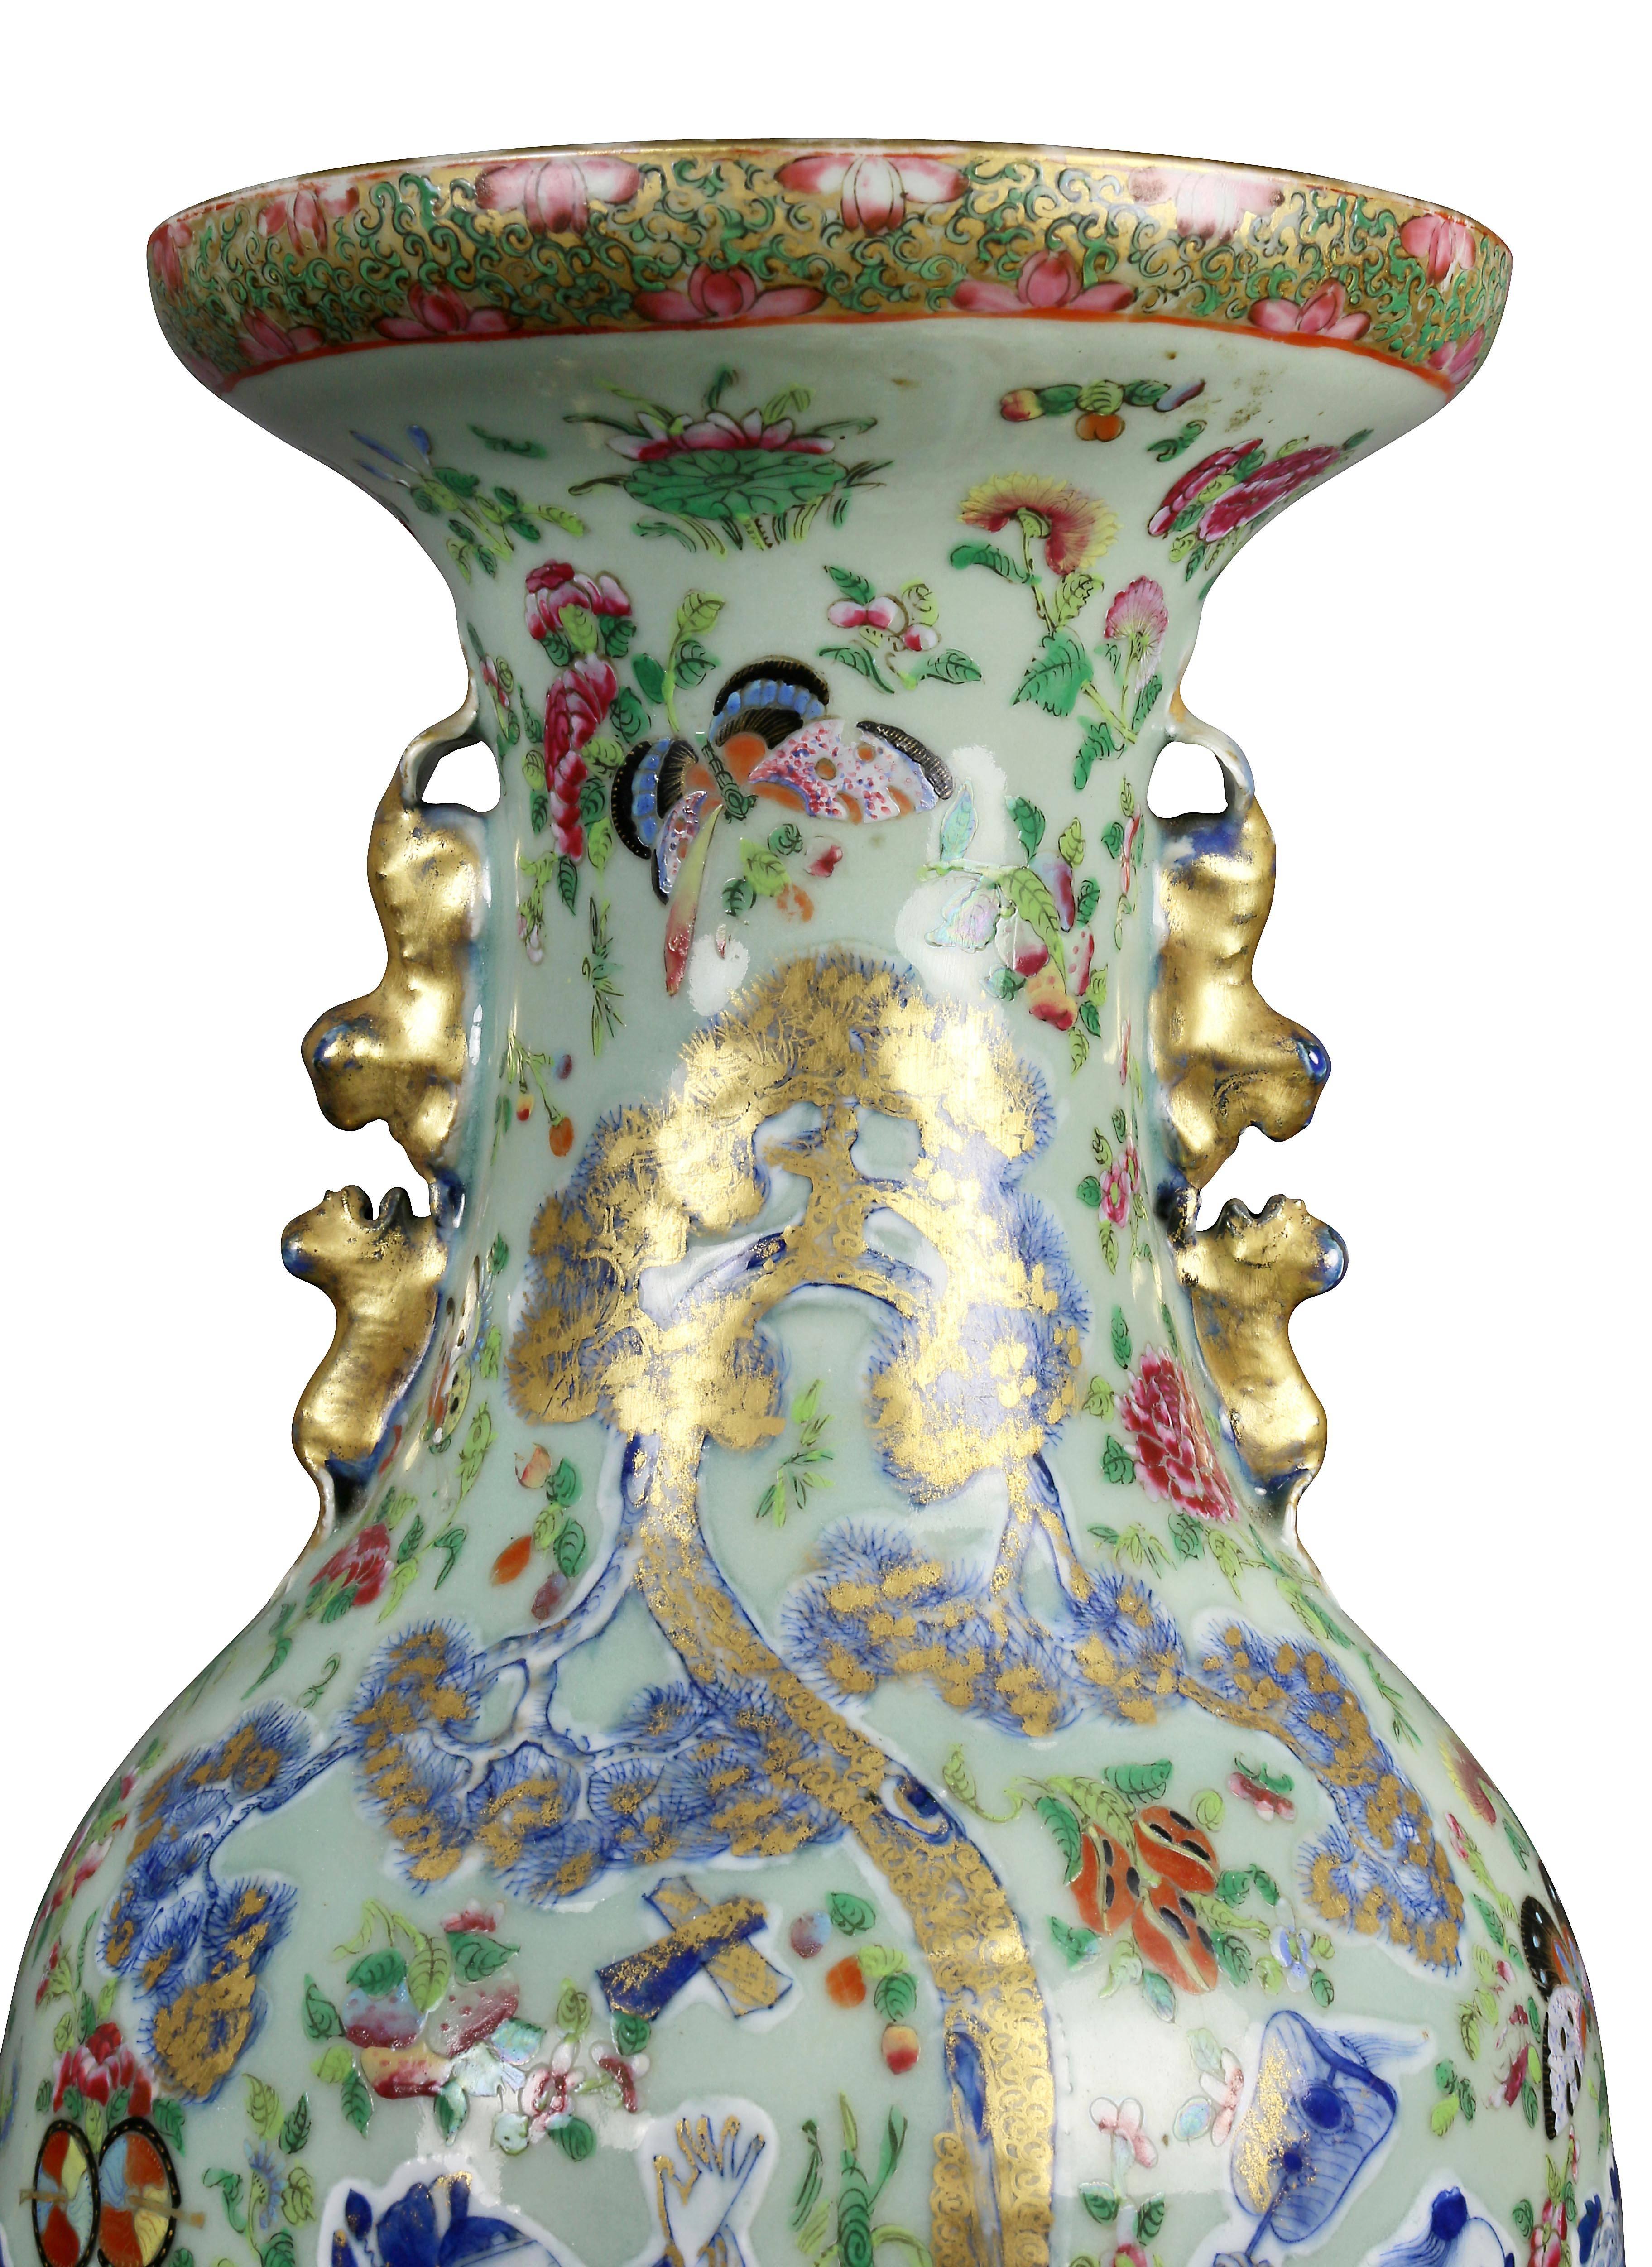 Decorated with figures in a landscape. We have all the original lamp fittings.